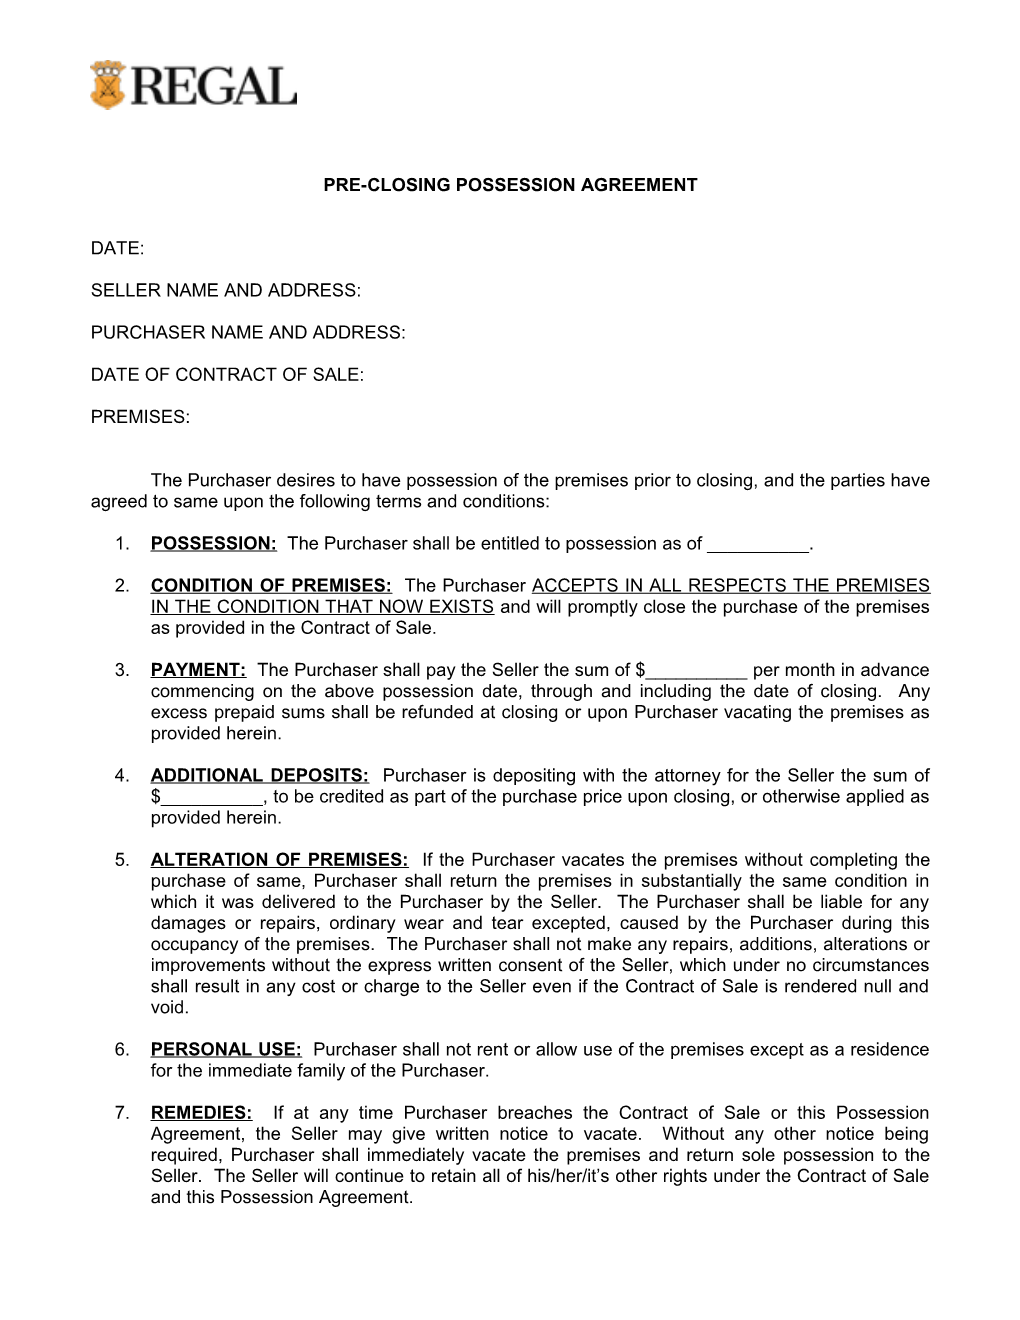 Pre-Closing Possession Agreement